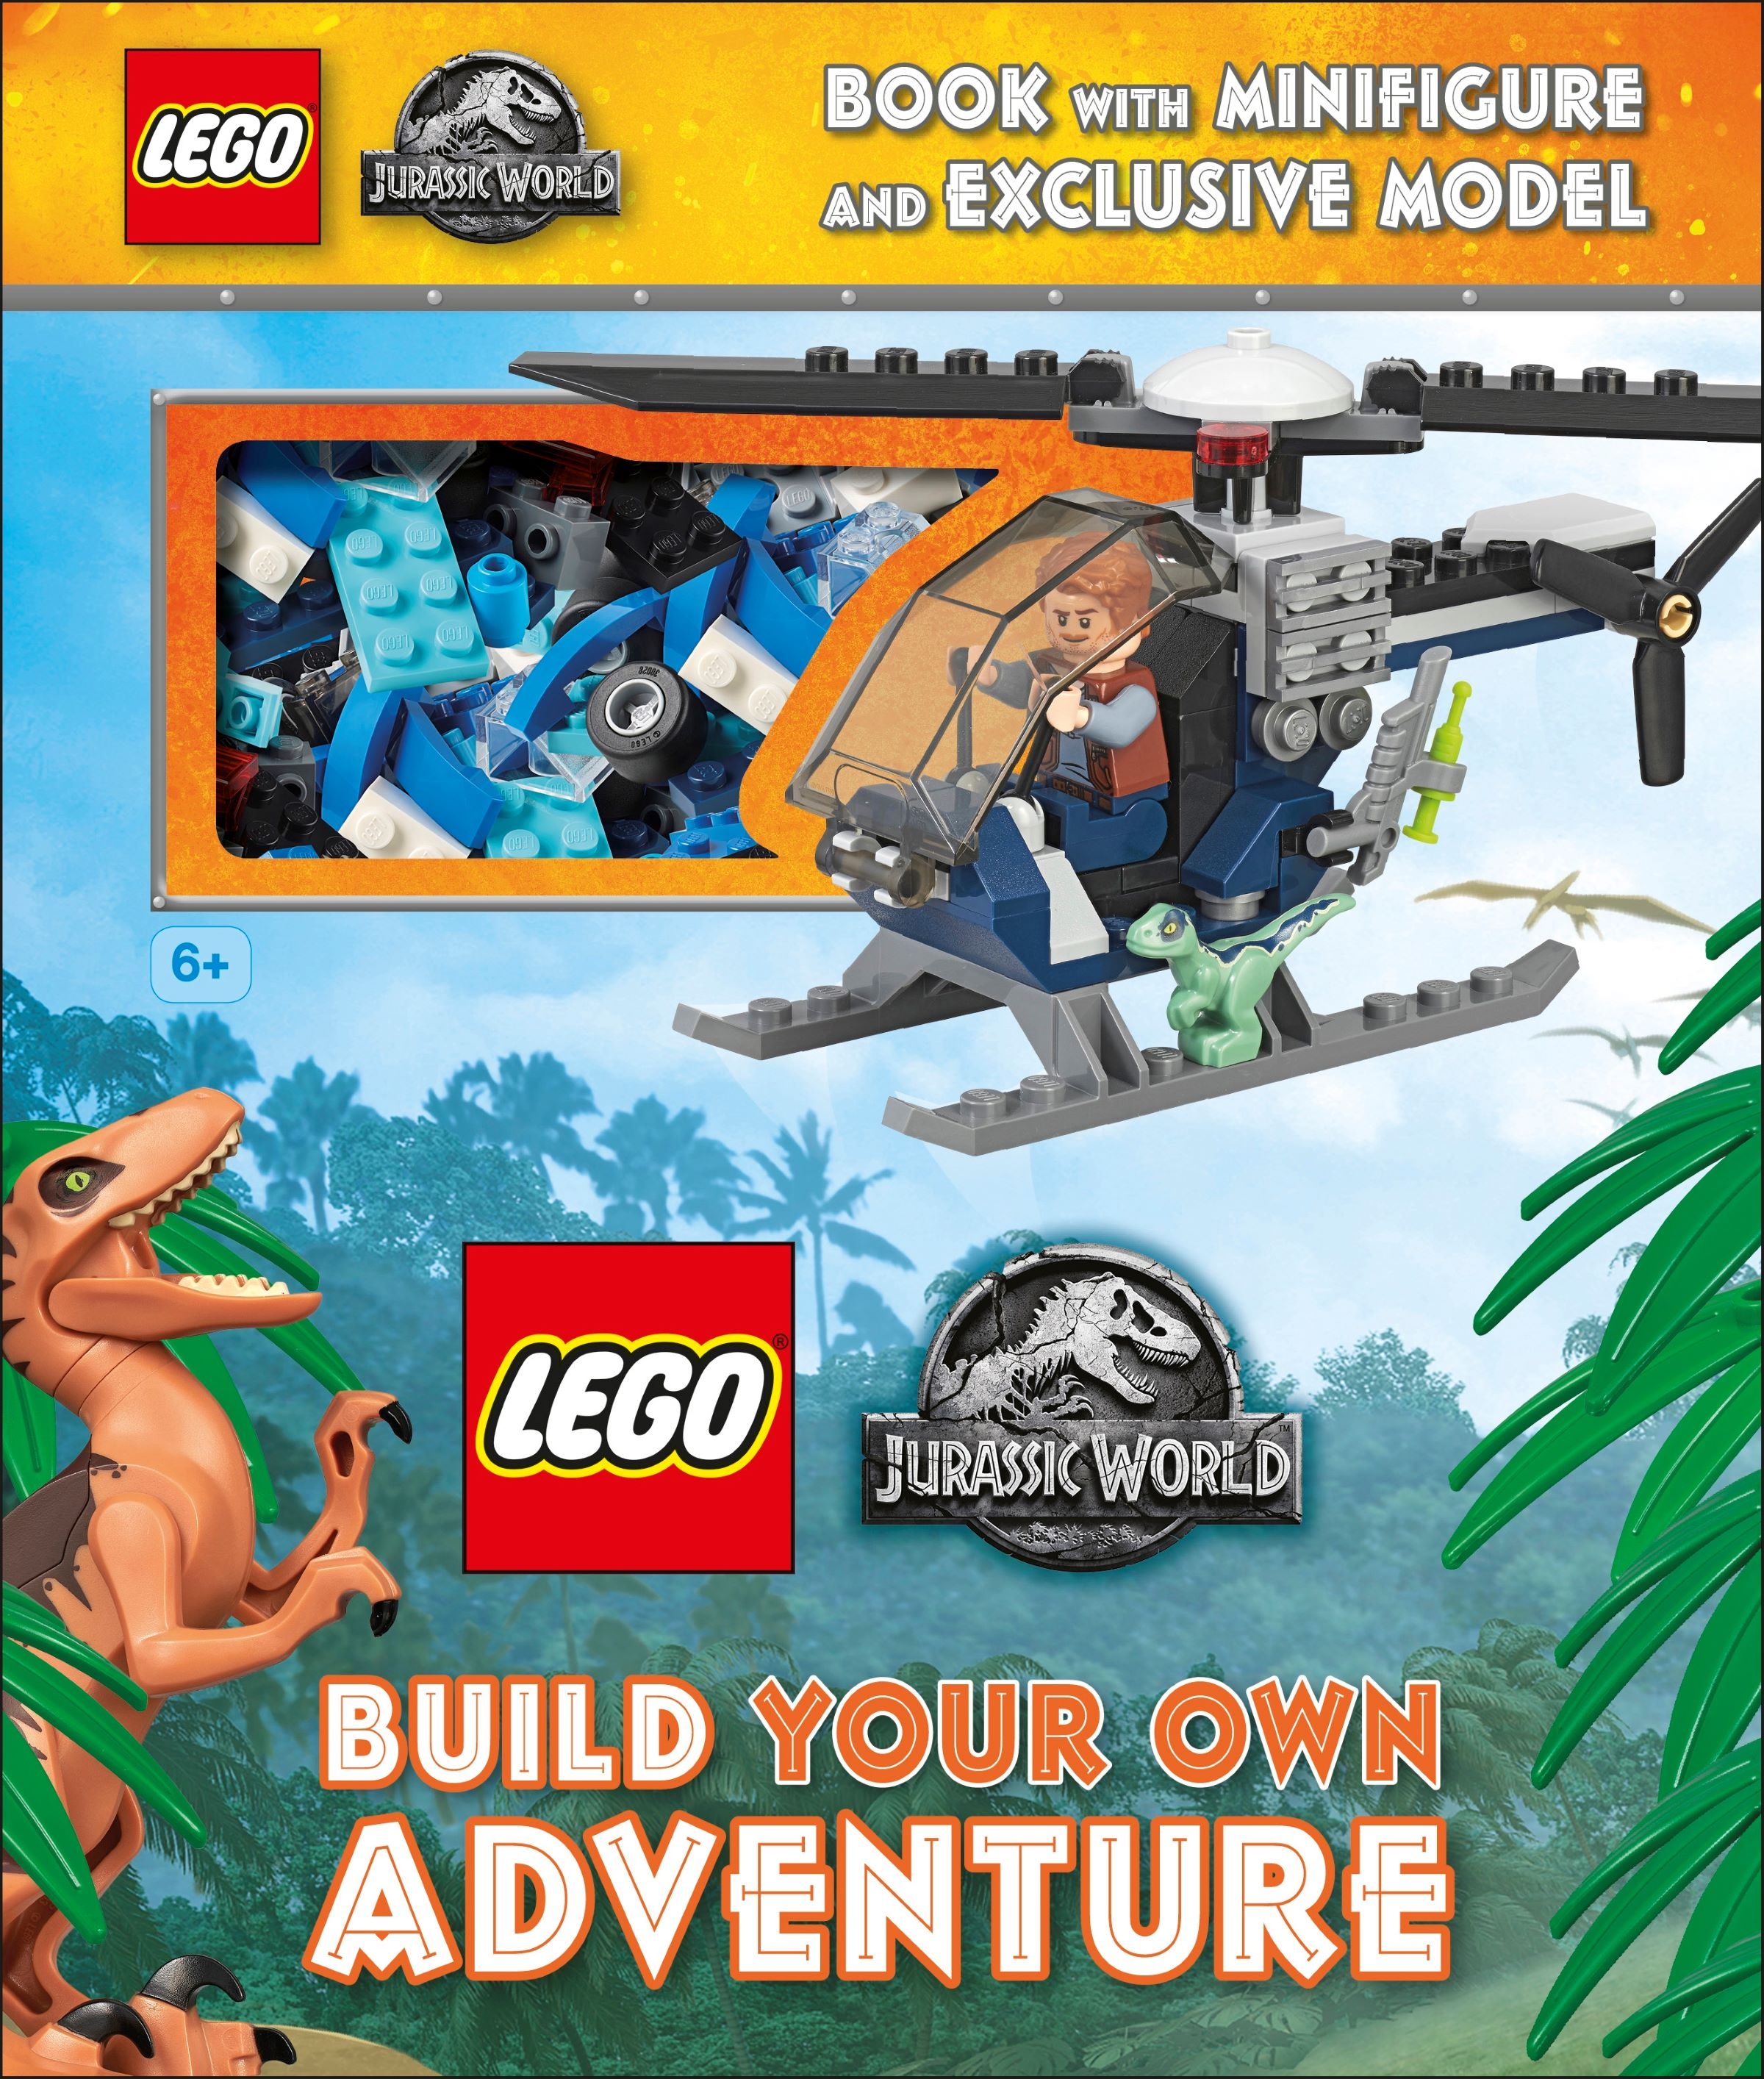 andrageren Tryk ned Kong Lear Build Your Own Adventure 5007614 | Jurassic World™ | Officiel LEGO® Shop DK